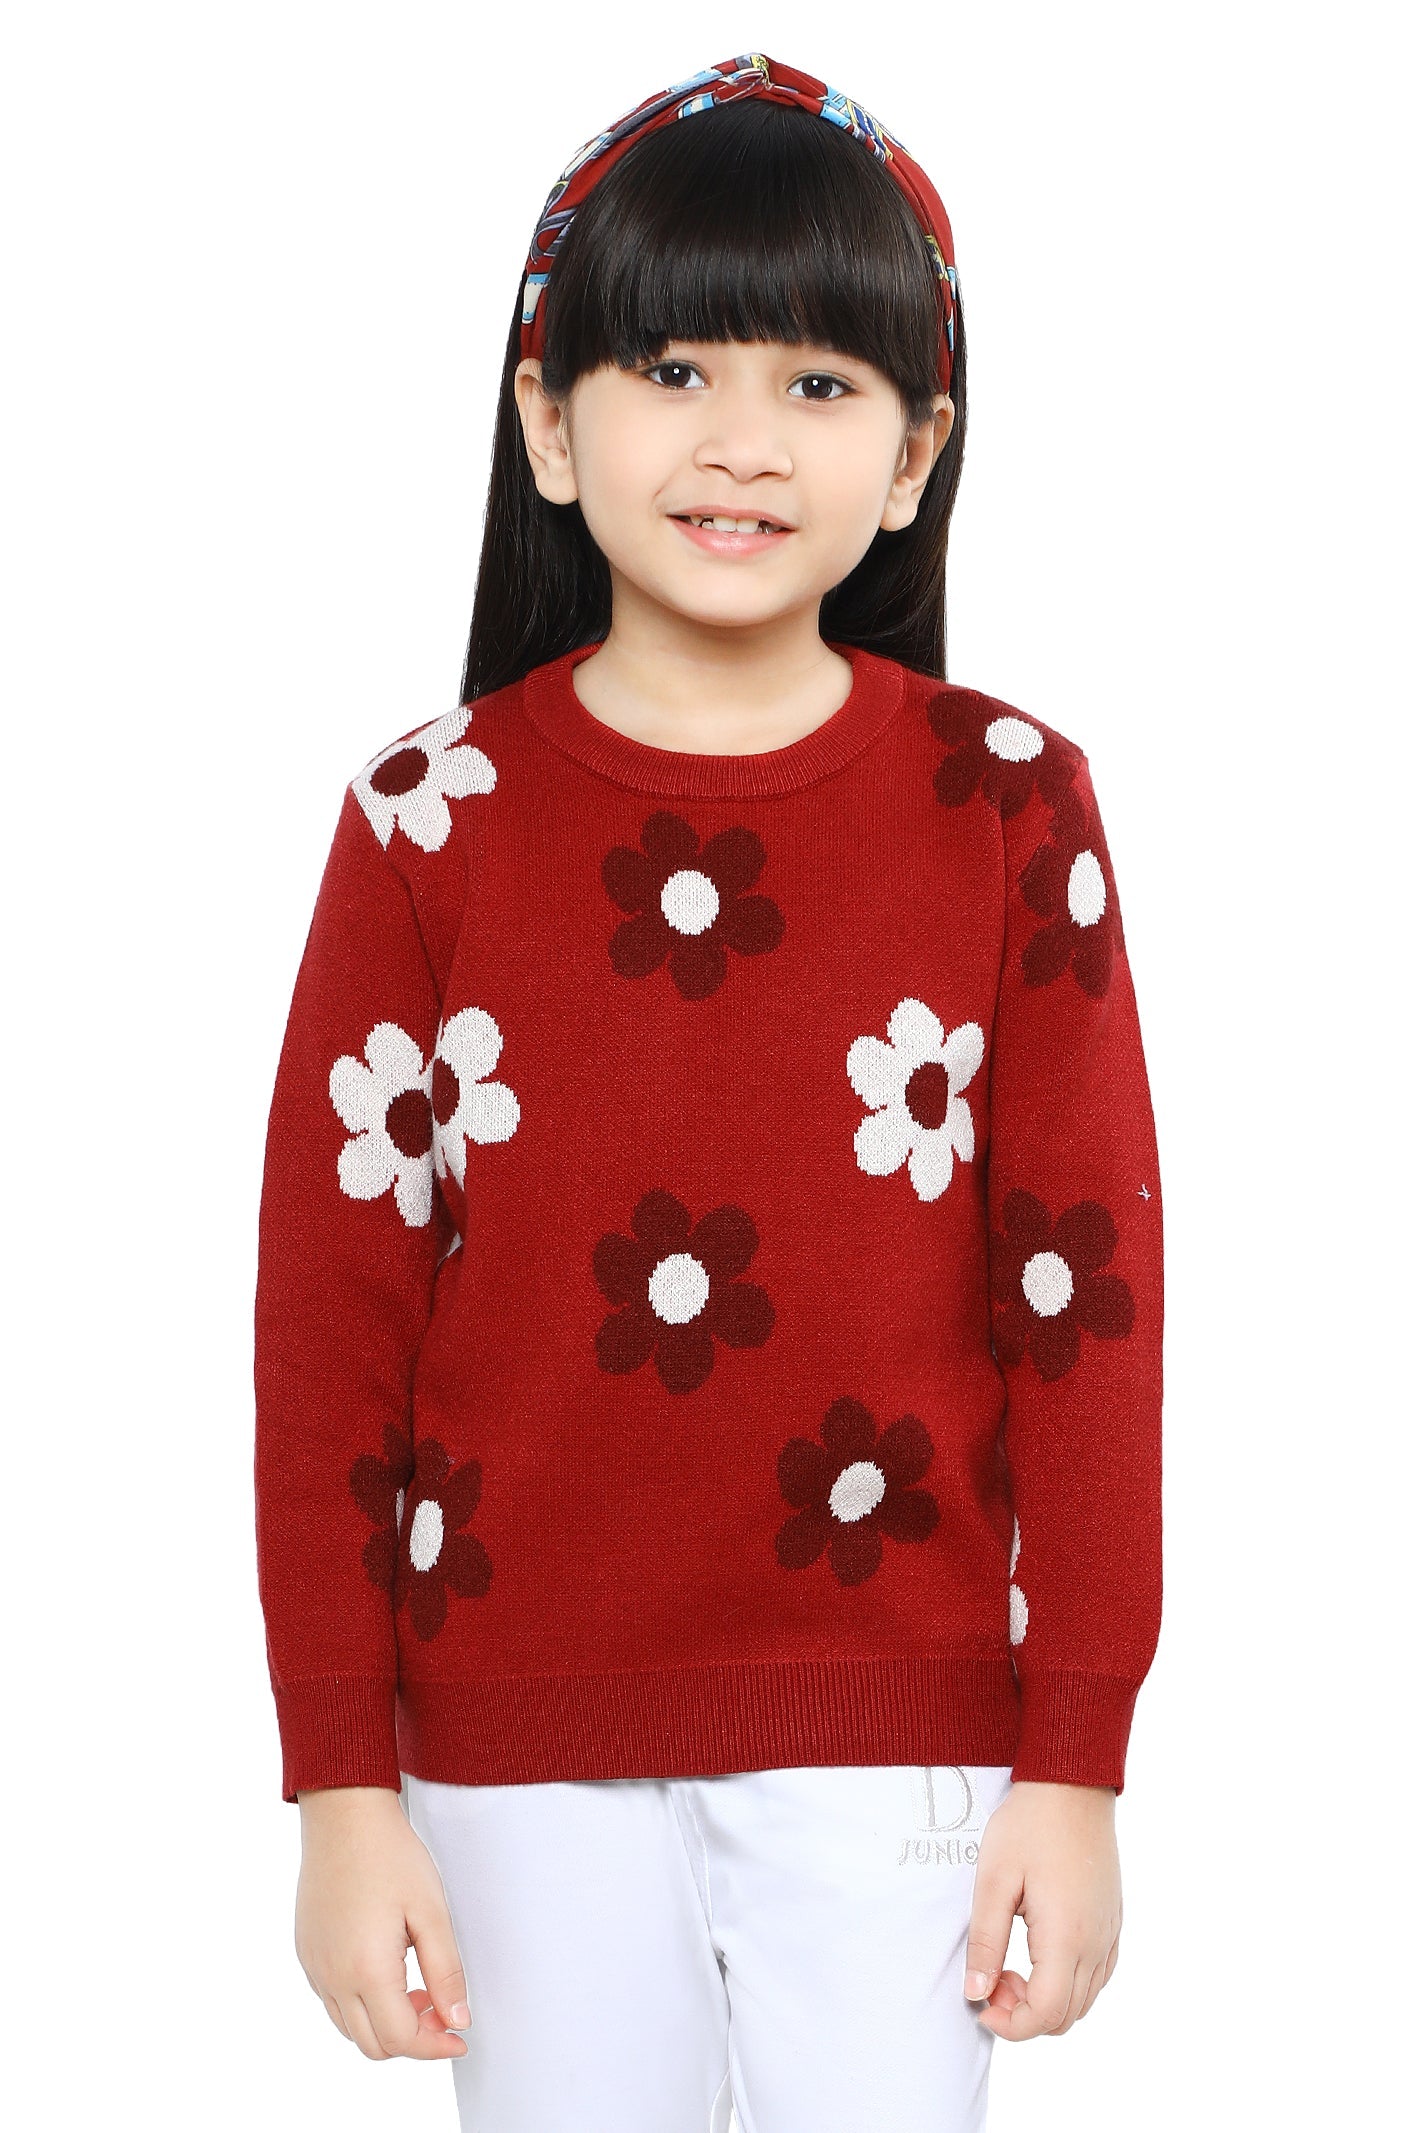 Girls Sweater SKU: KGE-0154-RED - Diners